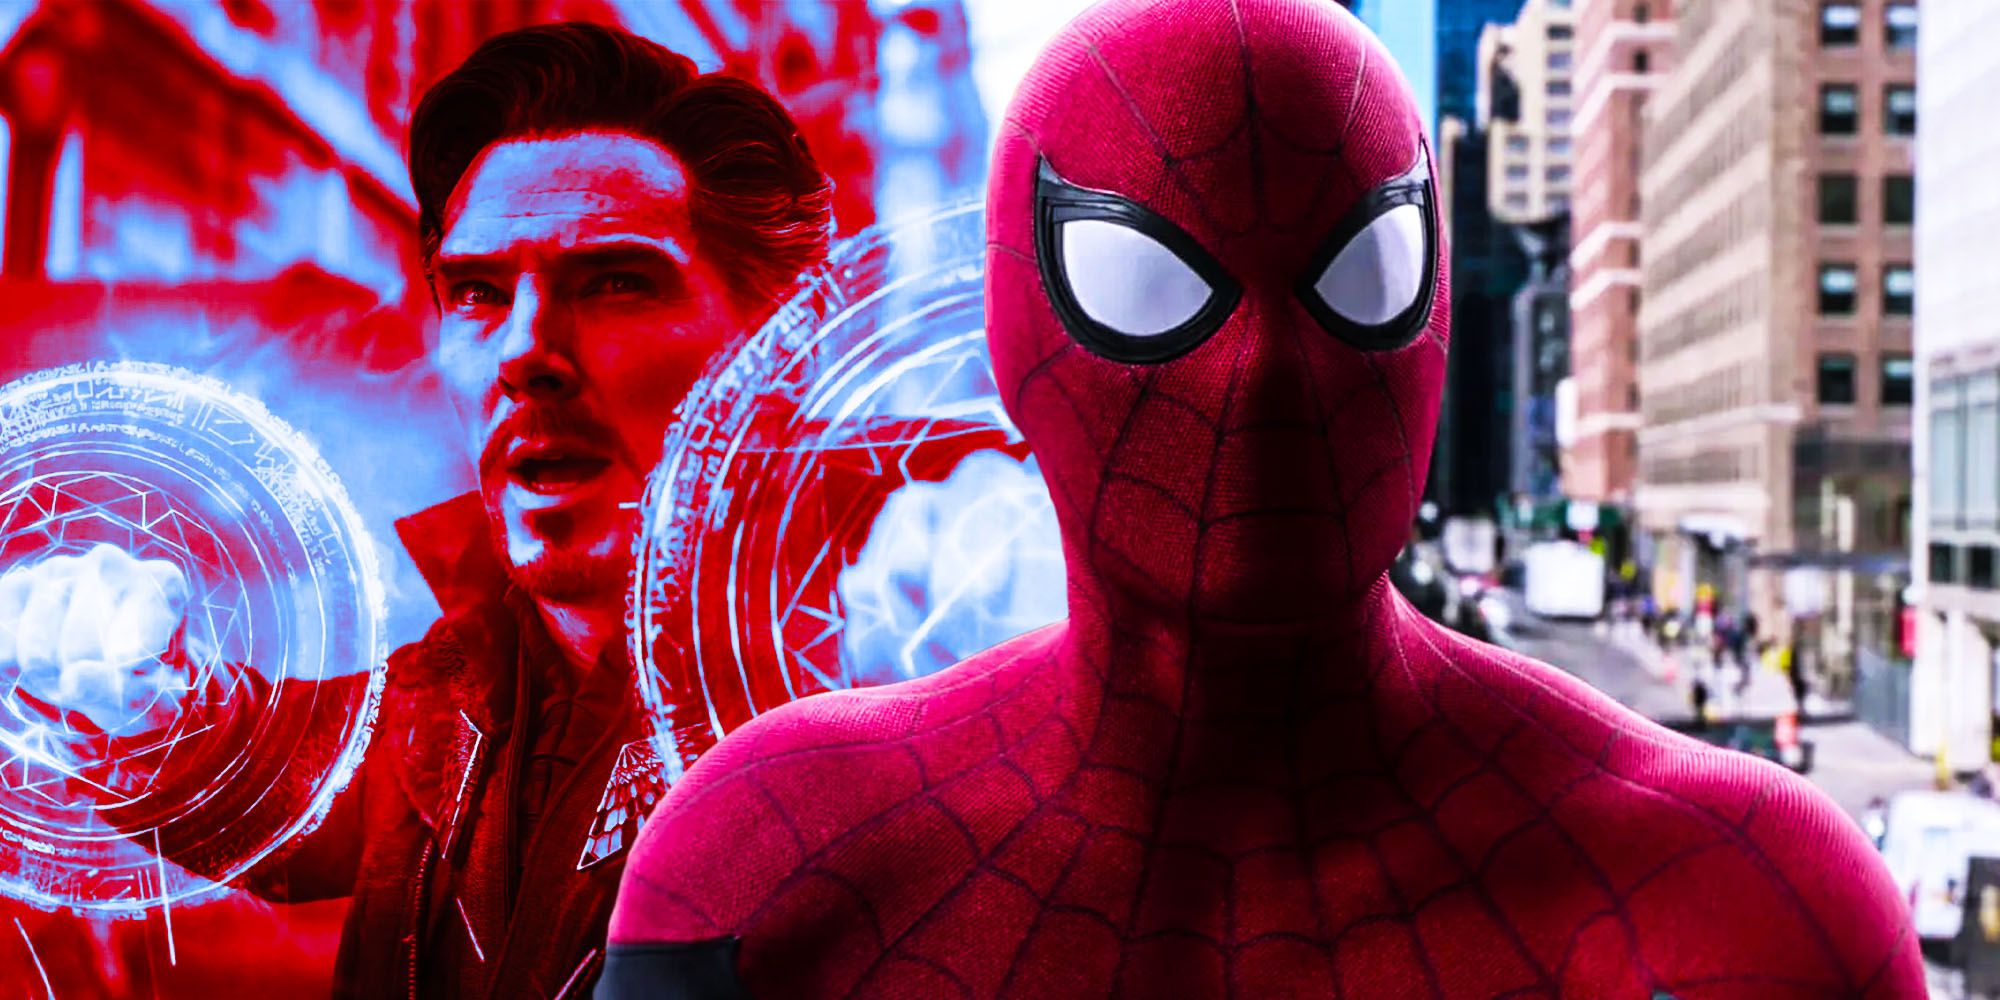 Spider-Man: No Way Home Trailer Leaks Ahead of Official Release - Informone